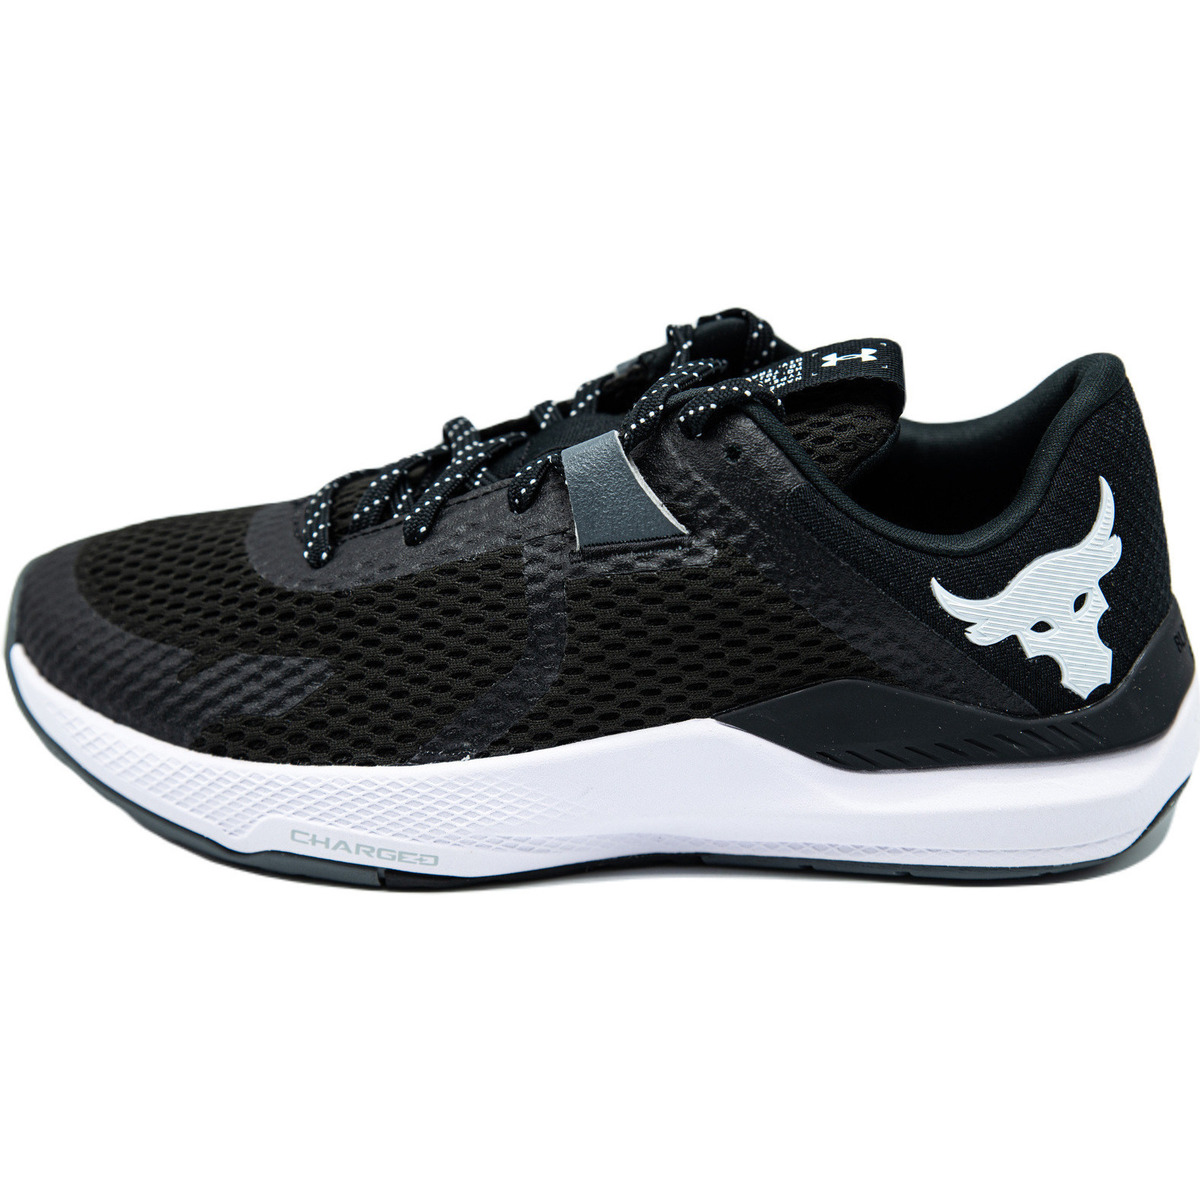 Sneakers Under Armour UA Project Rock BSR 2